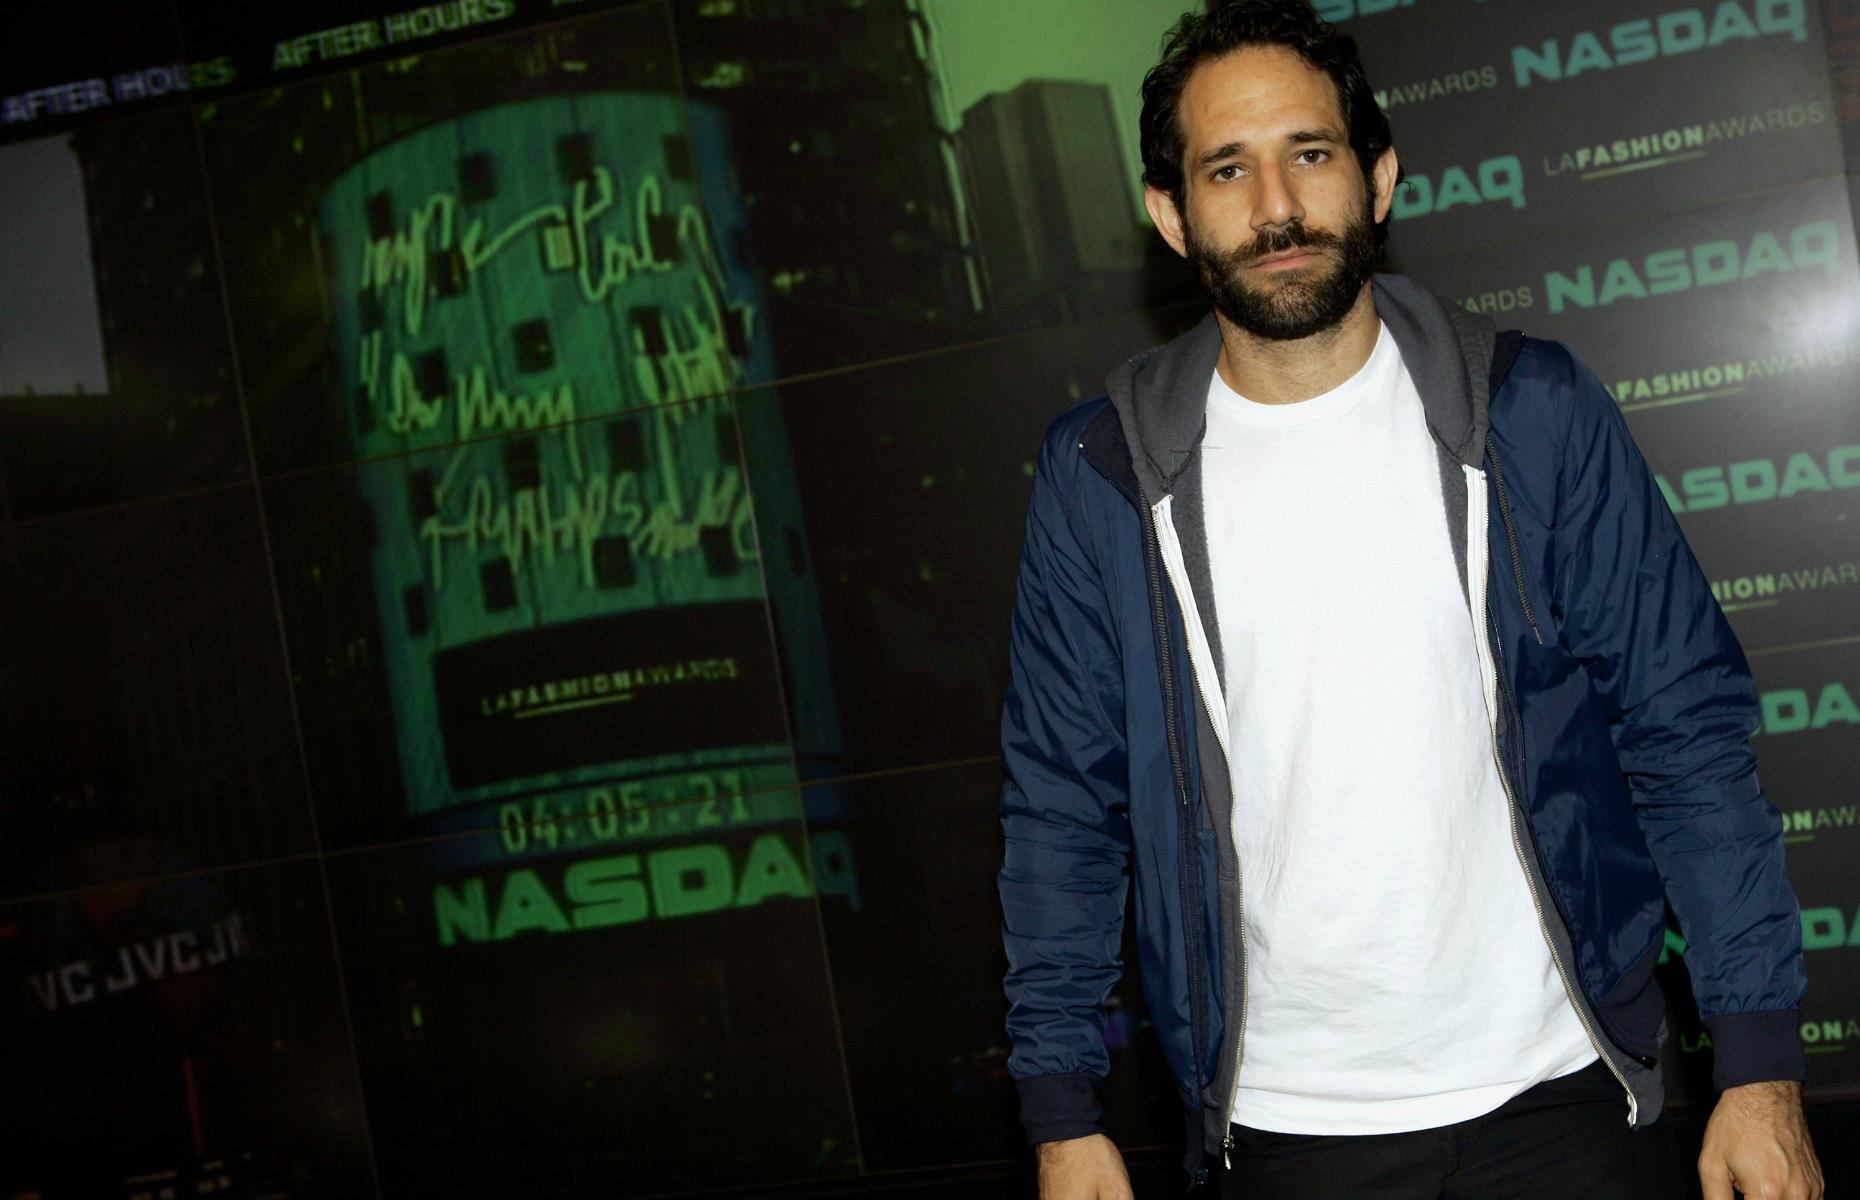 Dov Charney and American Apparel